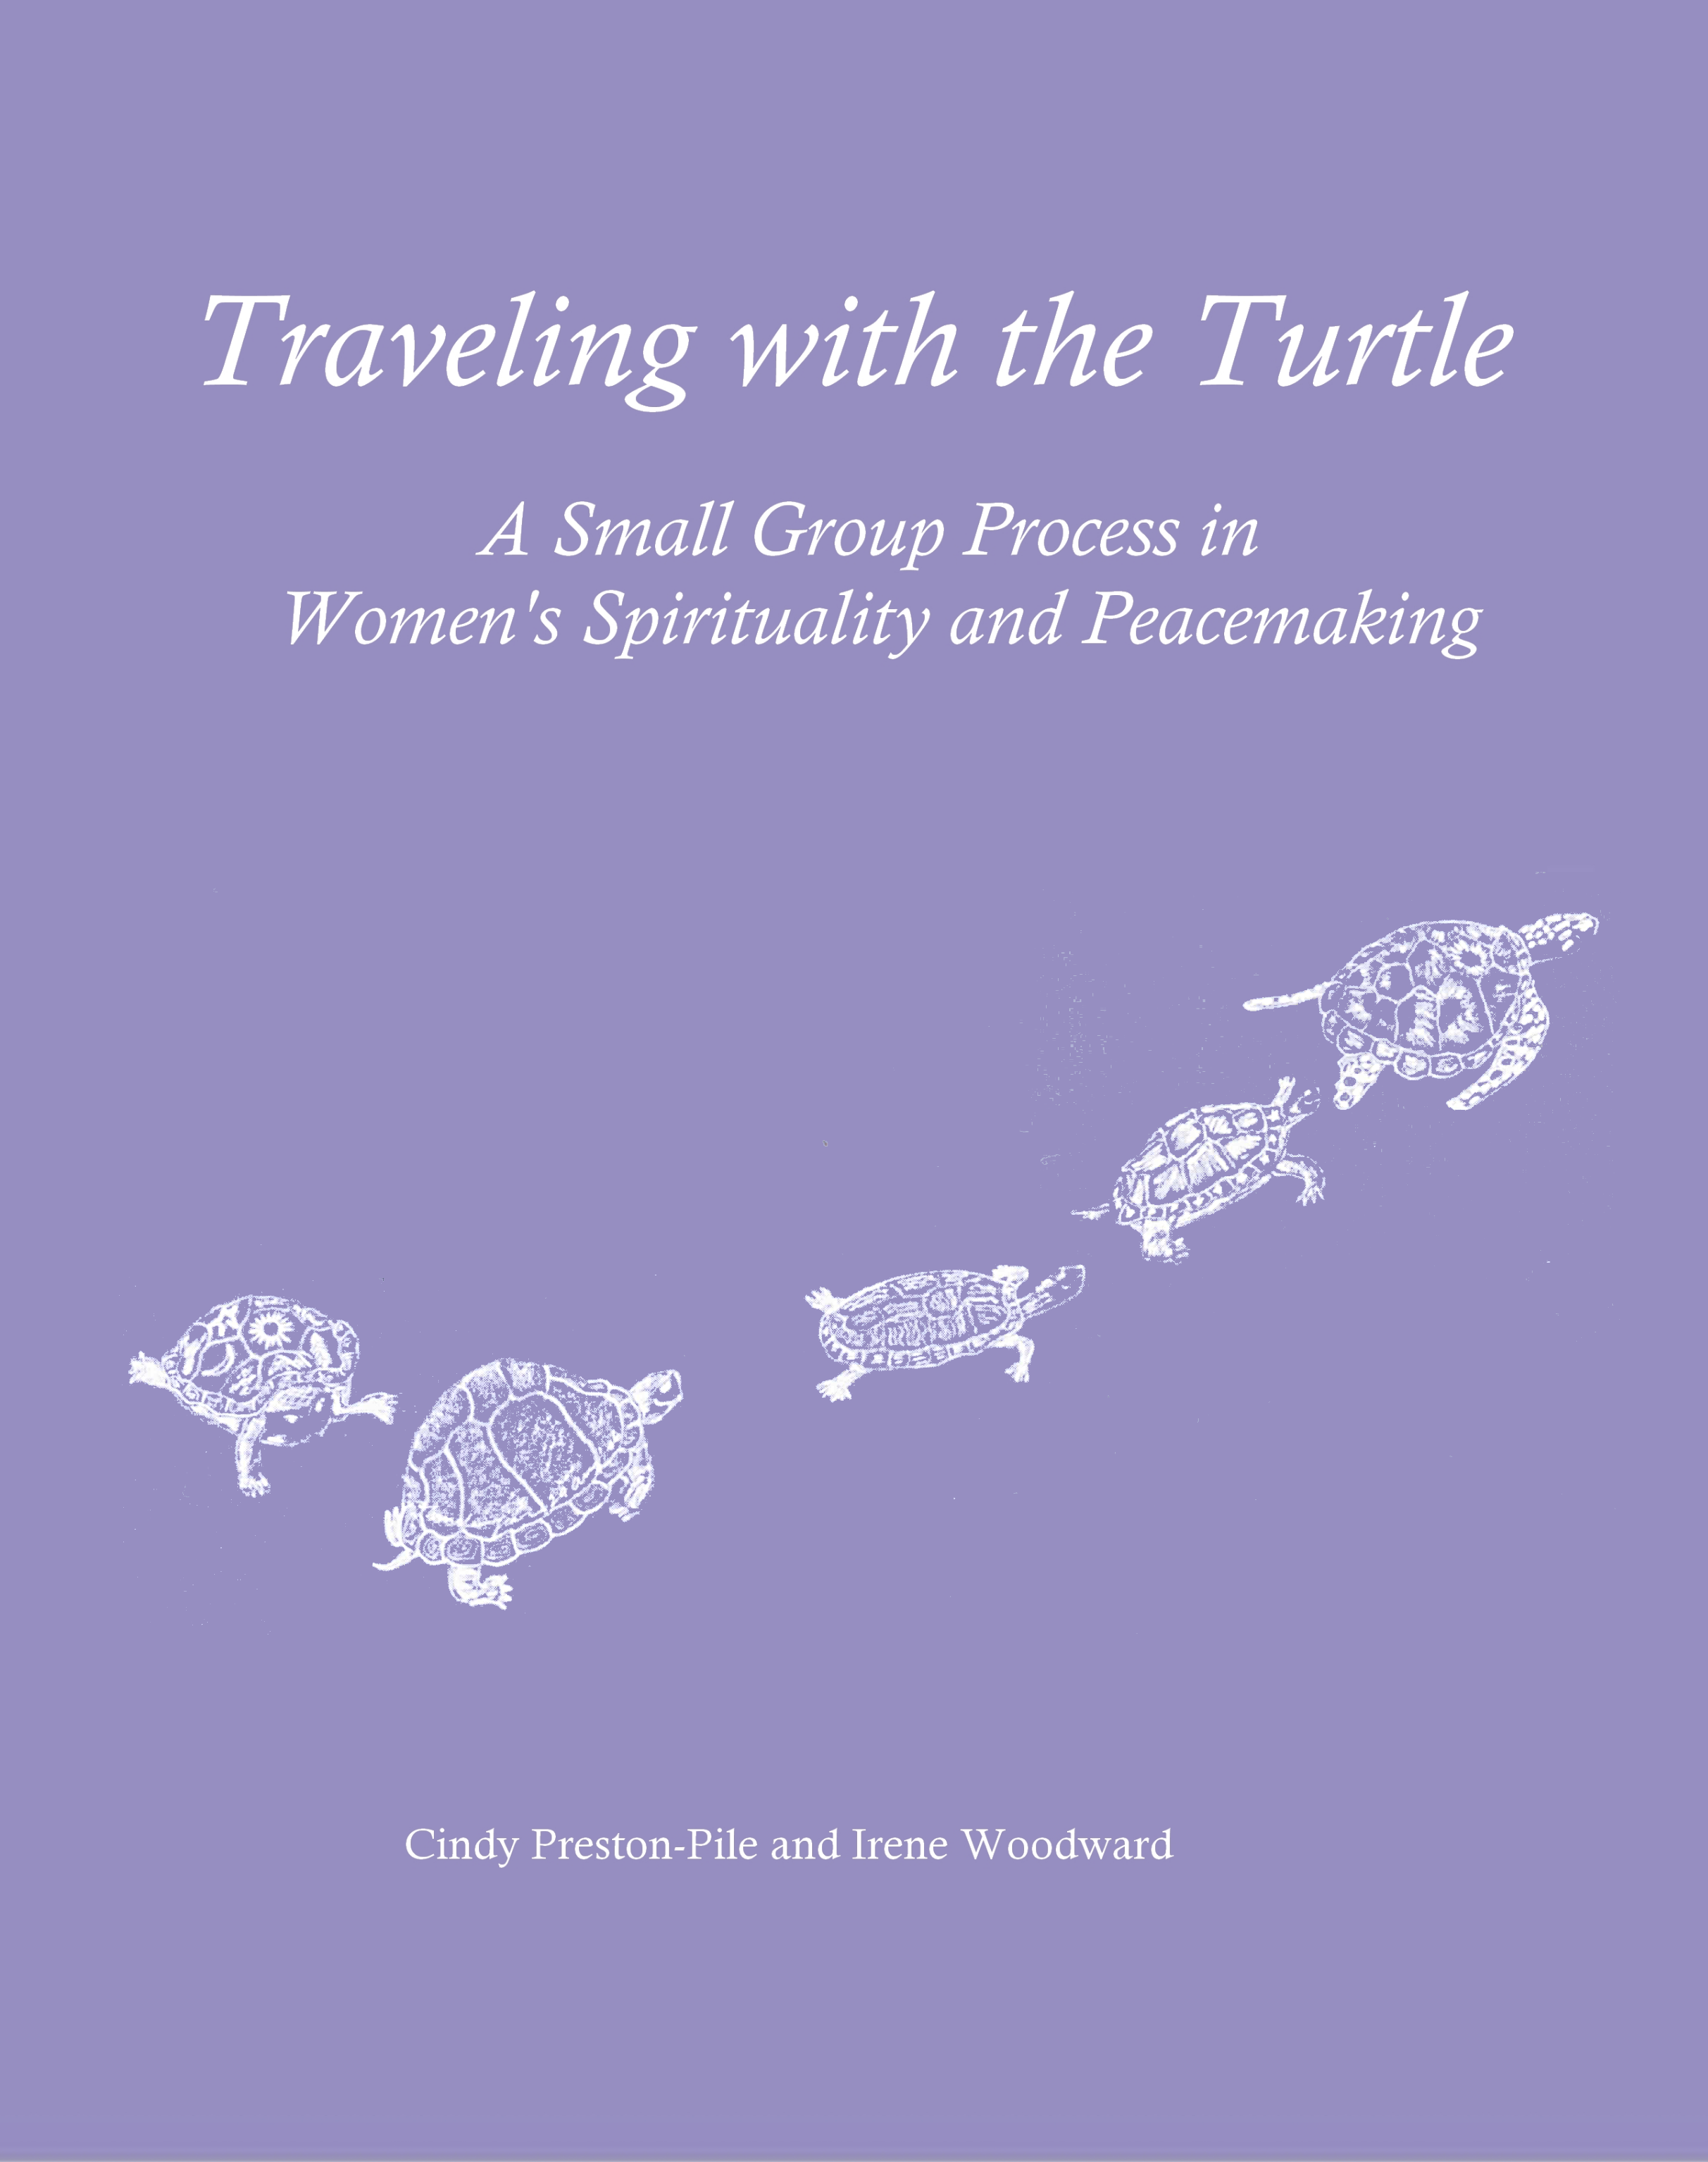 Traveling with the Turtle Front Cover.png